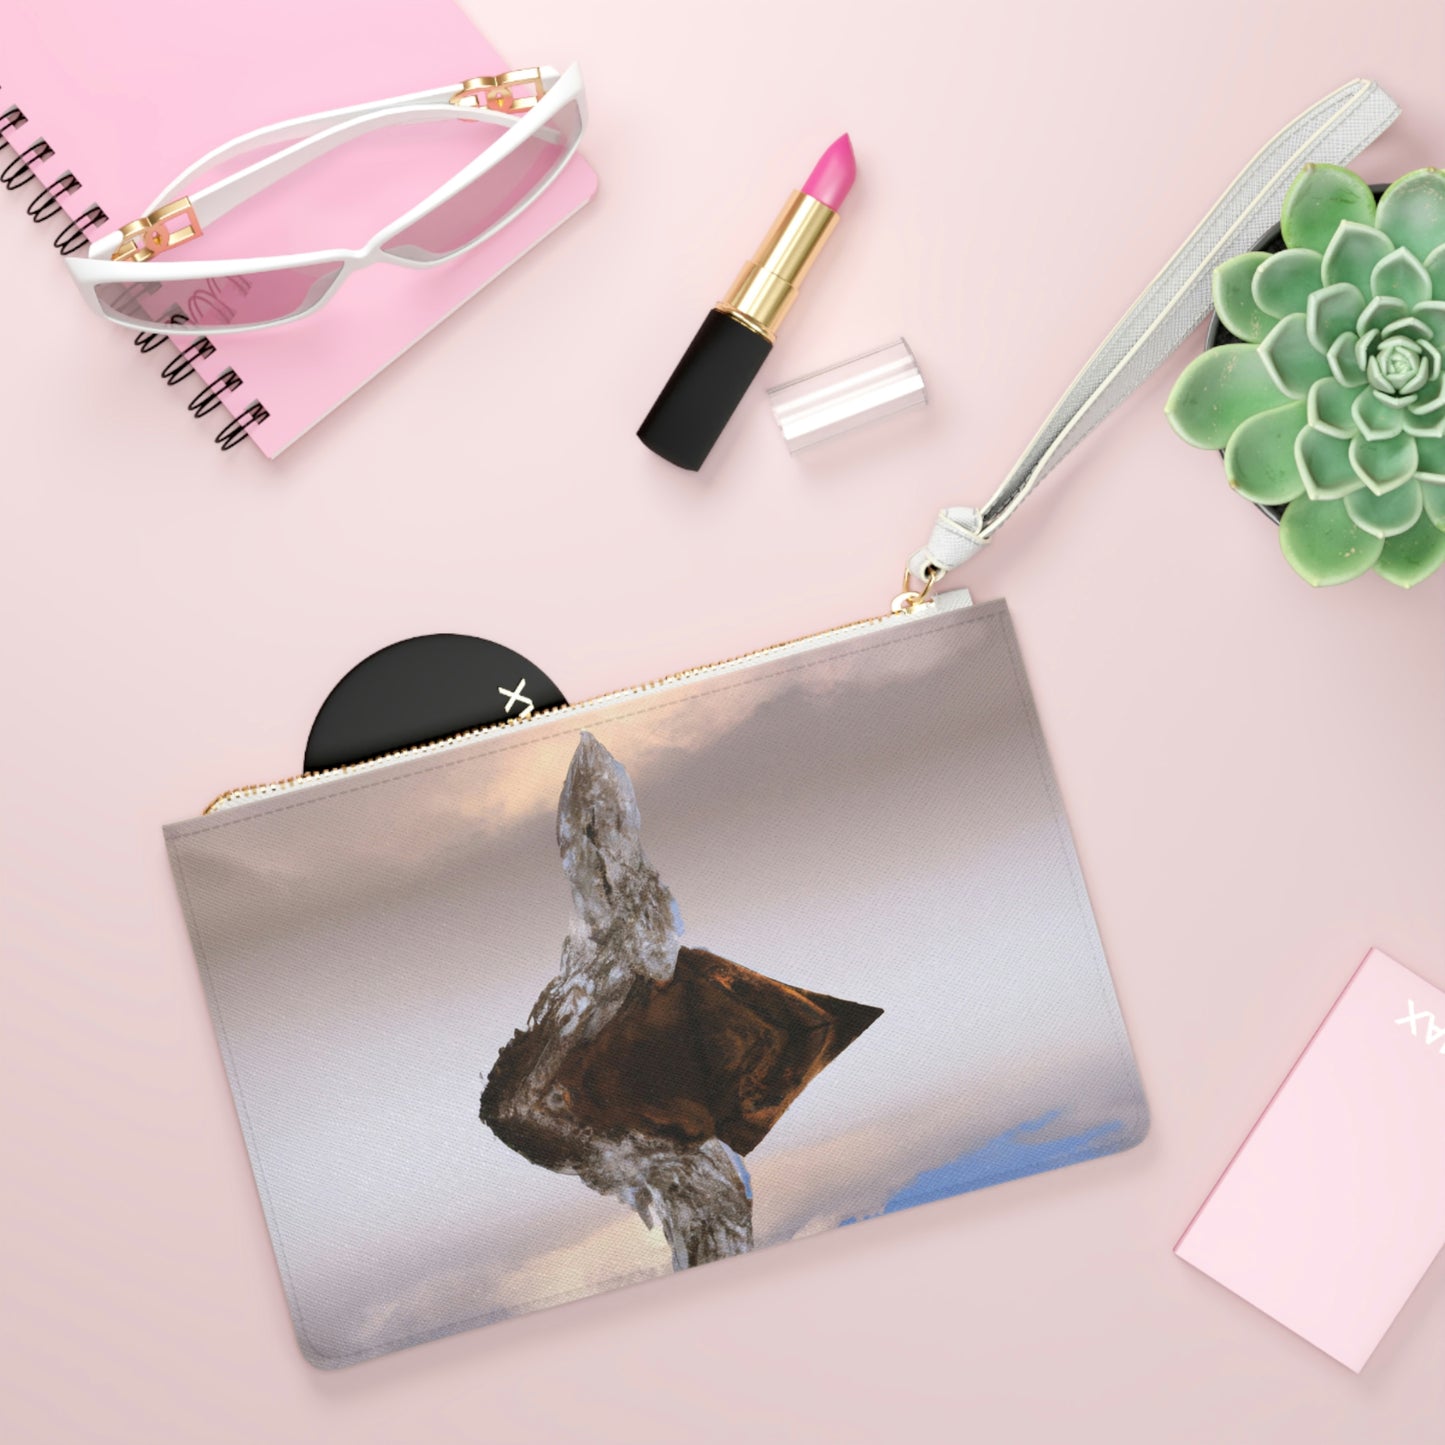 Icy Enchantment in the Lake - The Alien Clutch Bag